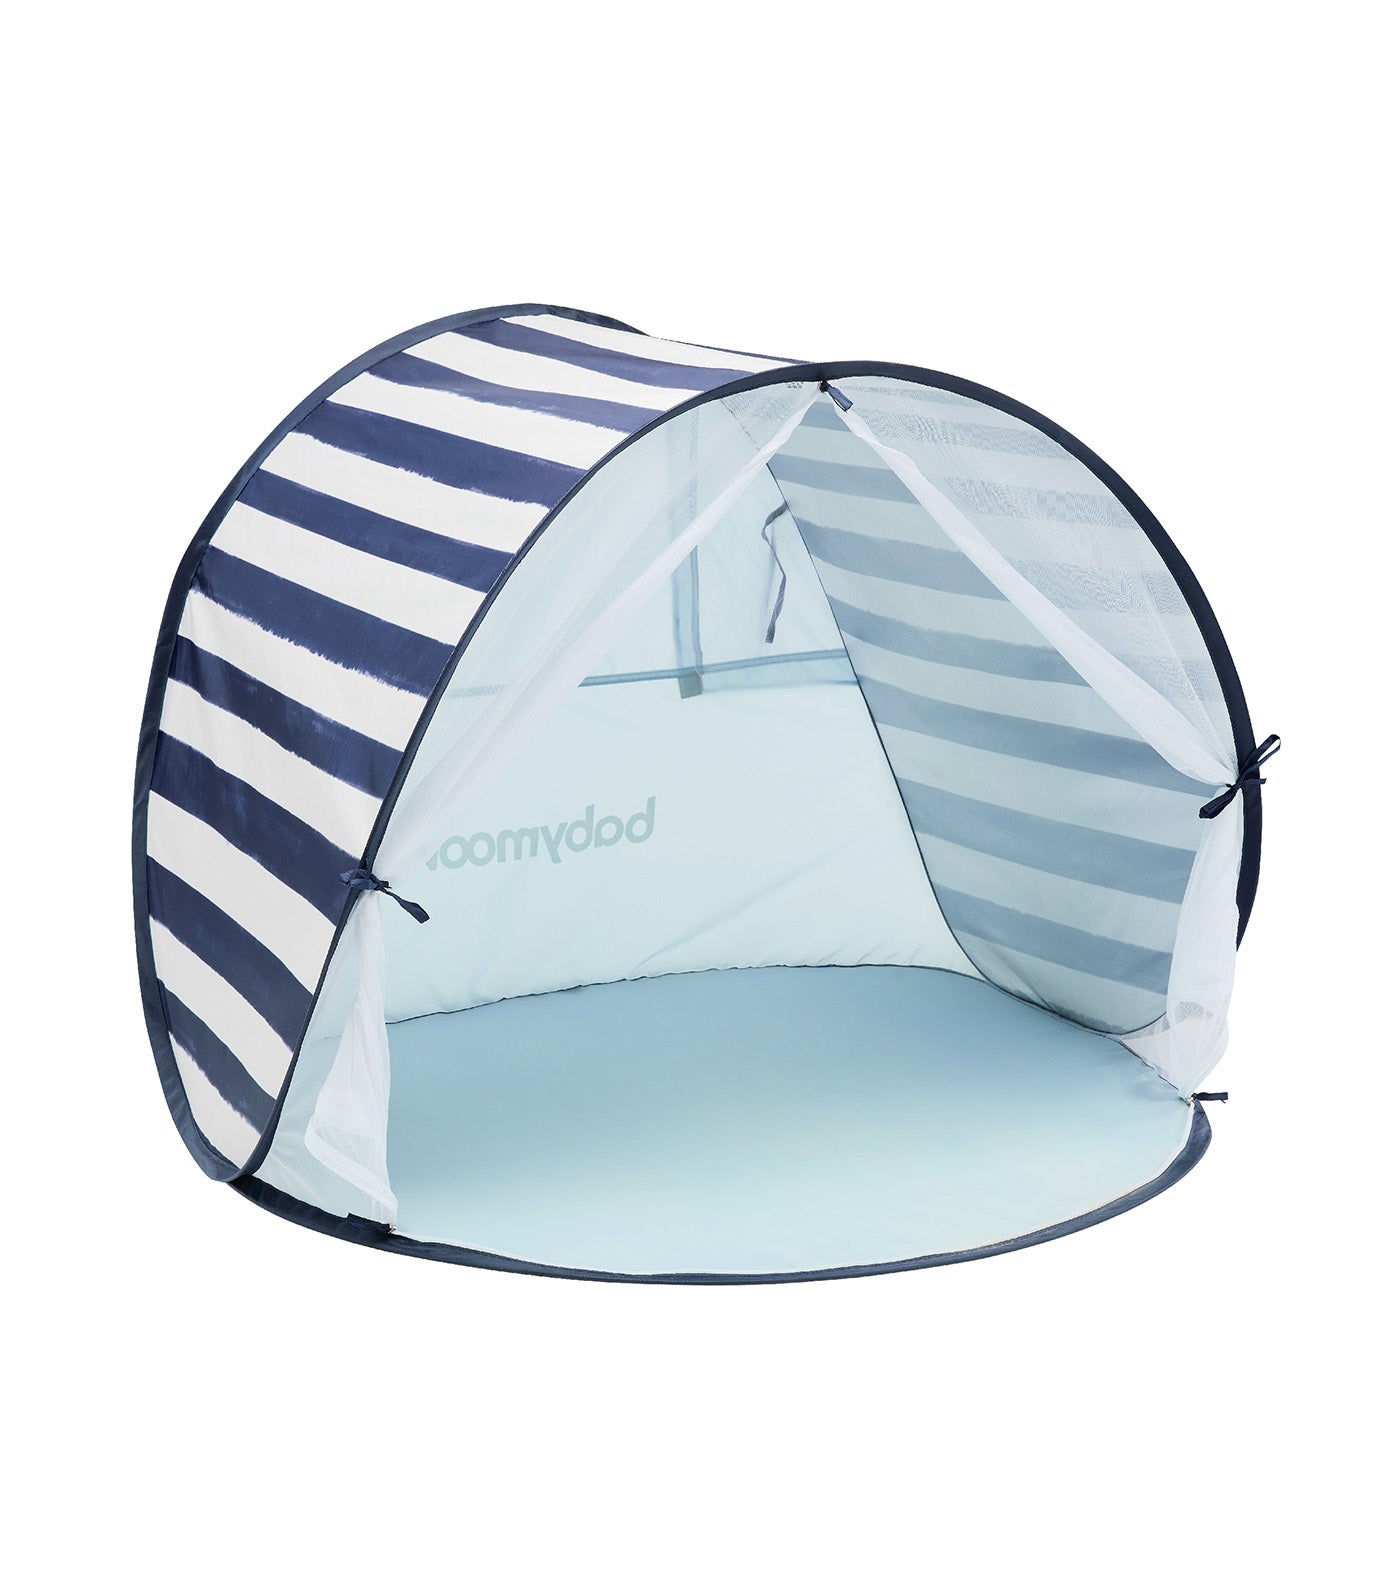 High Protection Anti-UV SPF 50+ Tent for Baby - Marinière